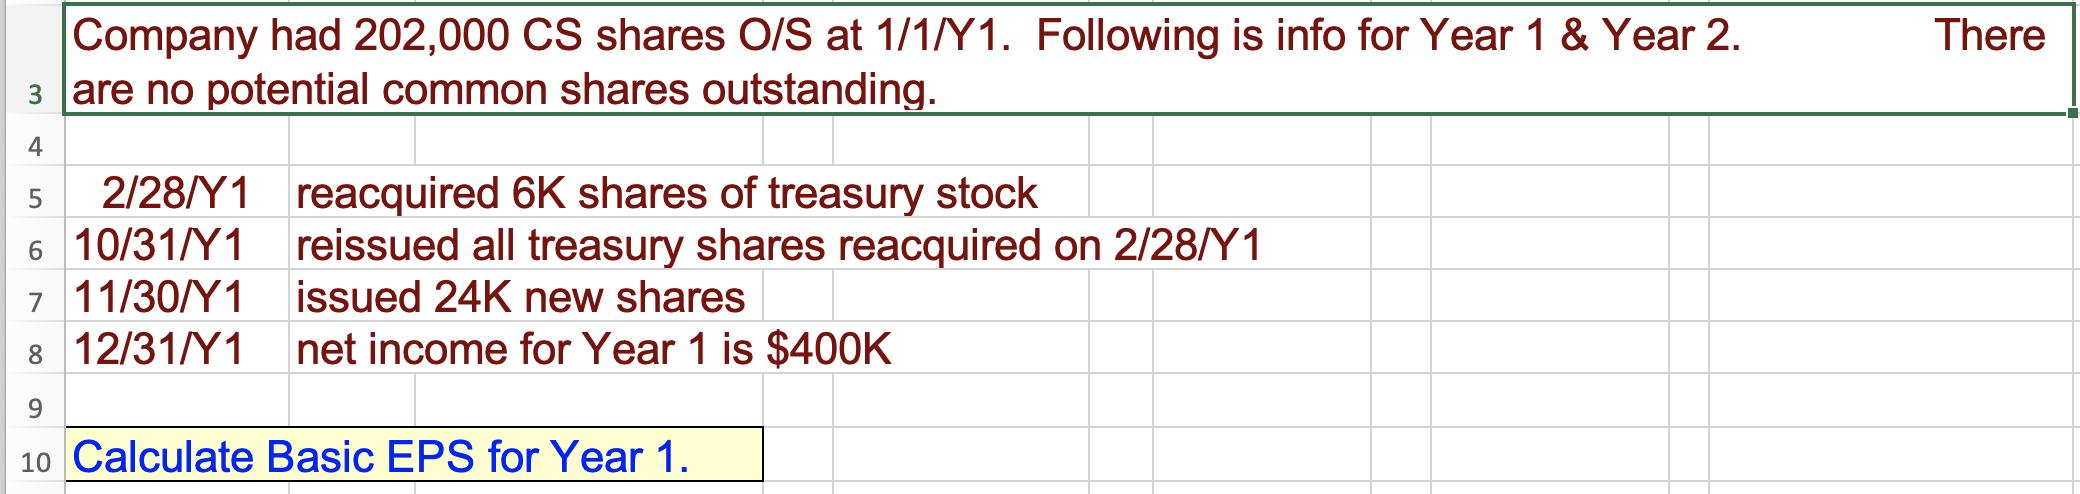 There Company had 202,000 CS shares O/S at 1/1/Y1. Following is info for Year 1 & Year 2. 3 are no potential common shares ou